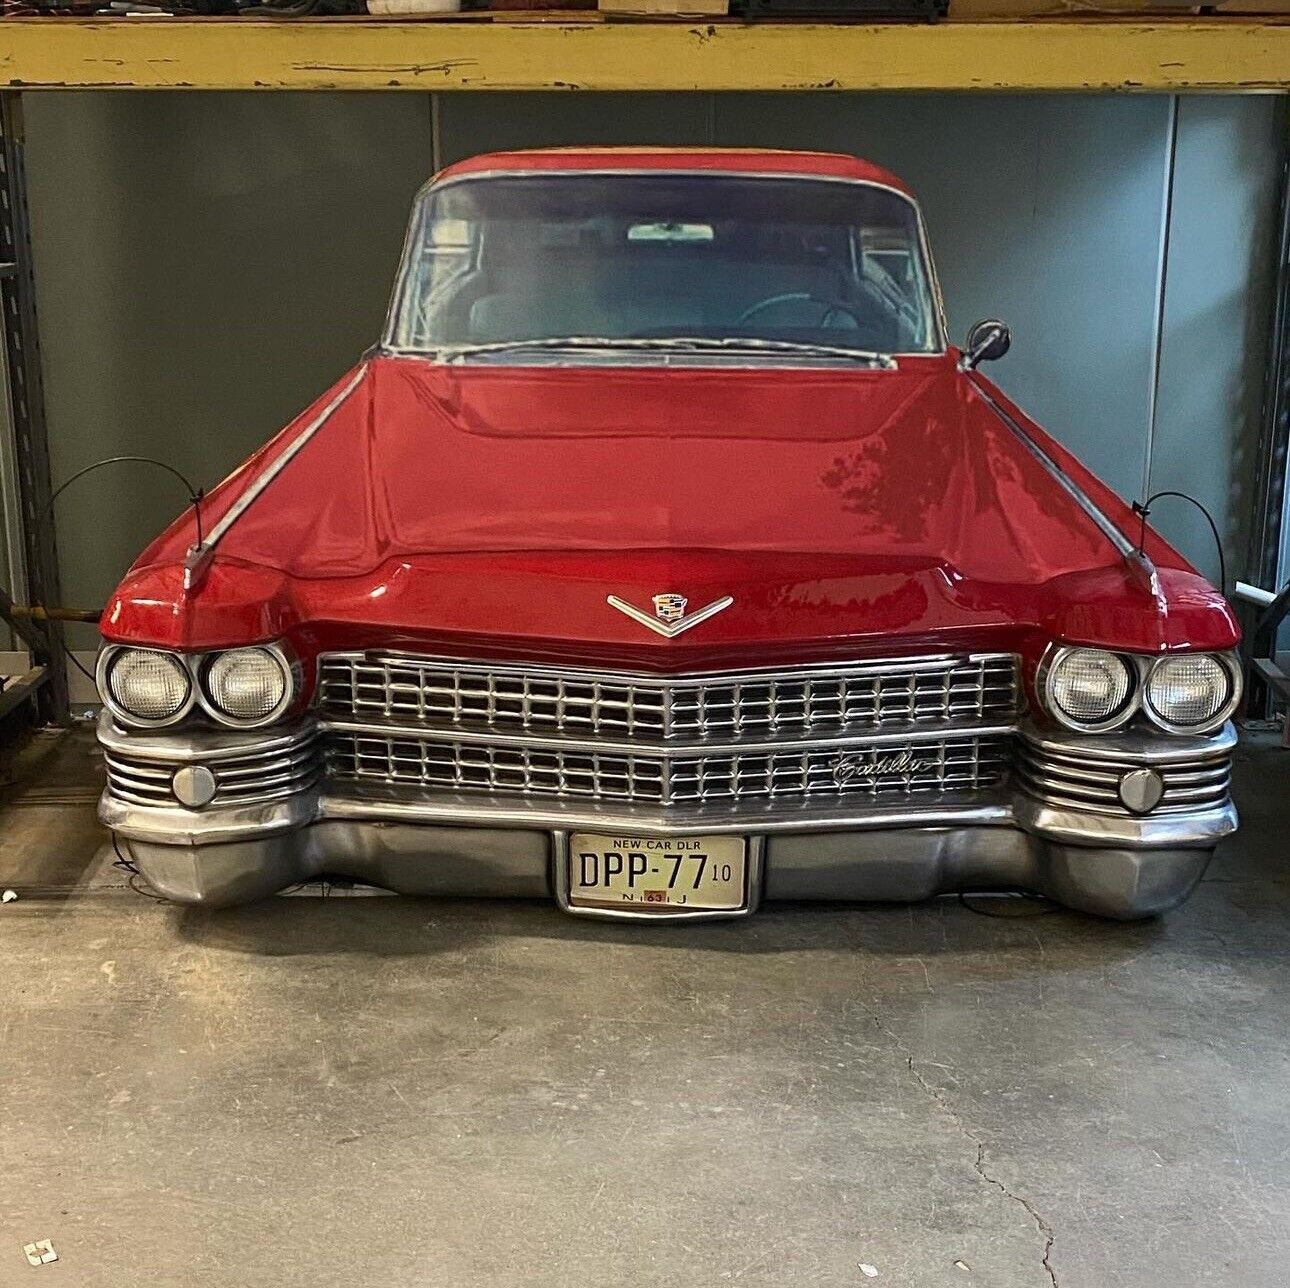 1963 Cadillac 7’ Wide Wall Hanger From Broadway Show Jersey Boys. Very Unique.